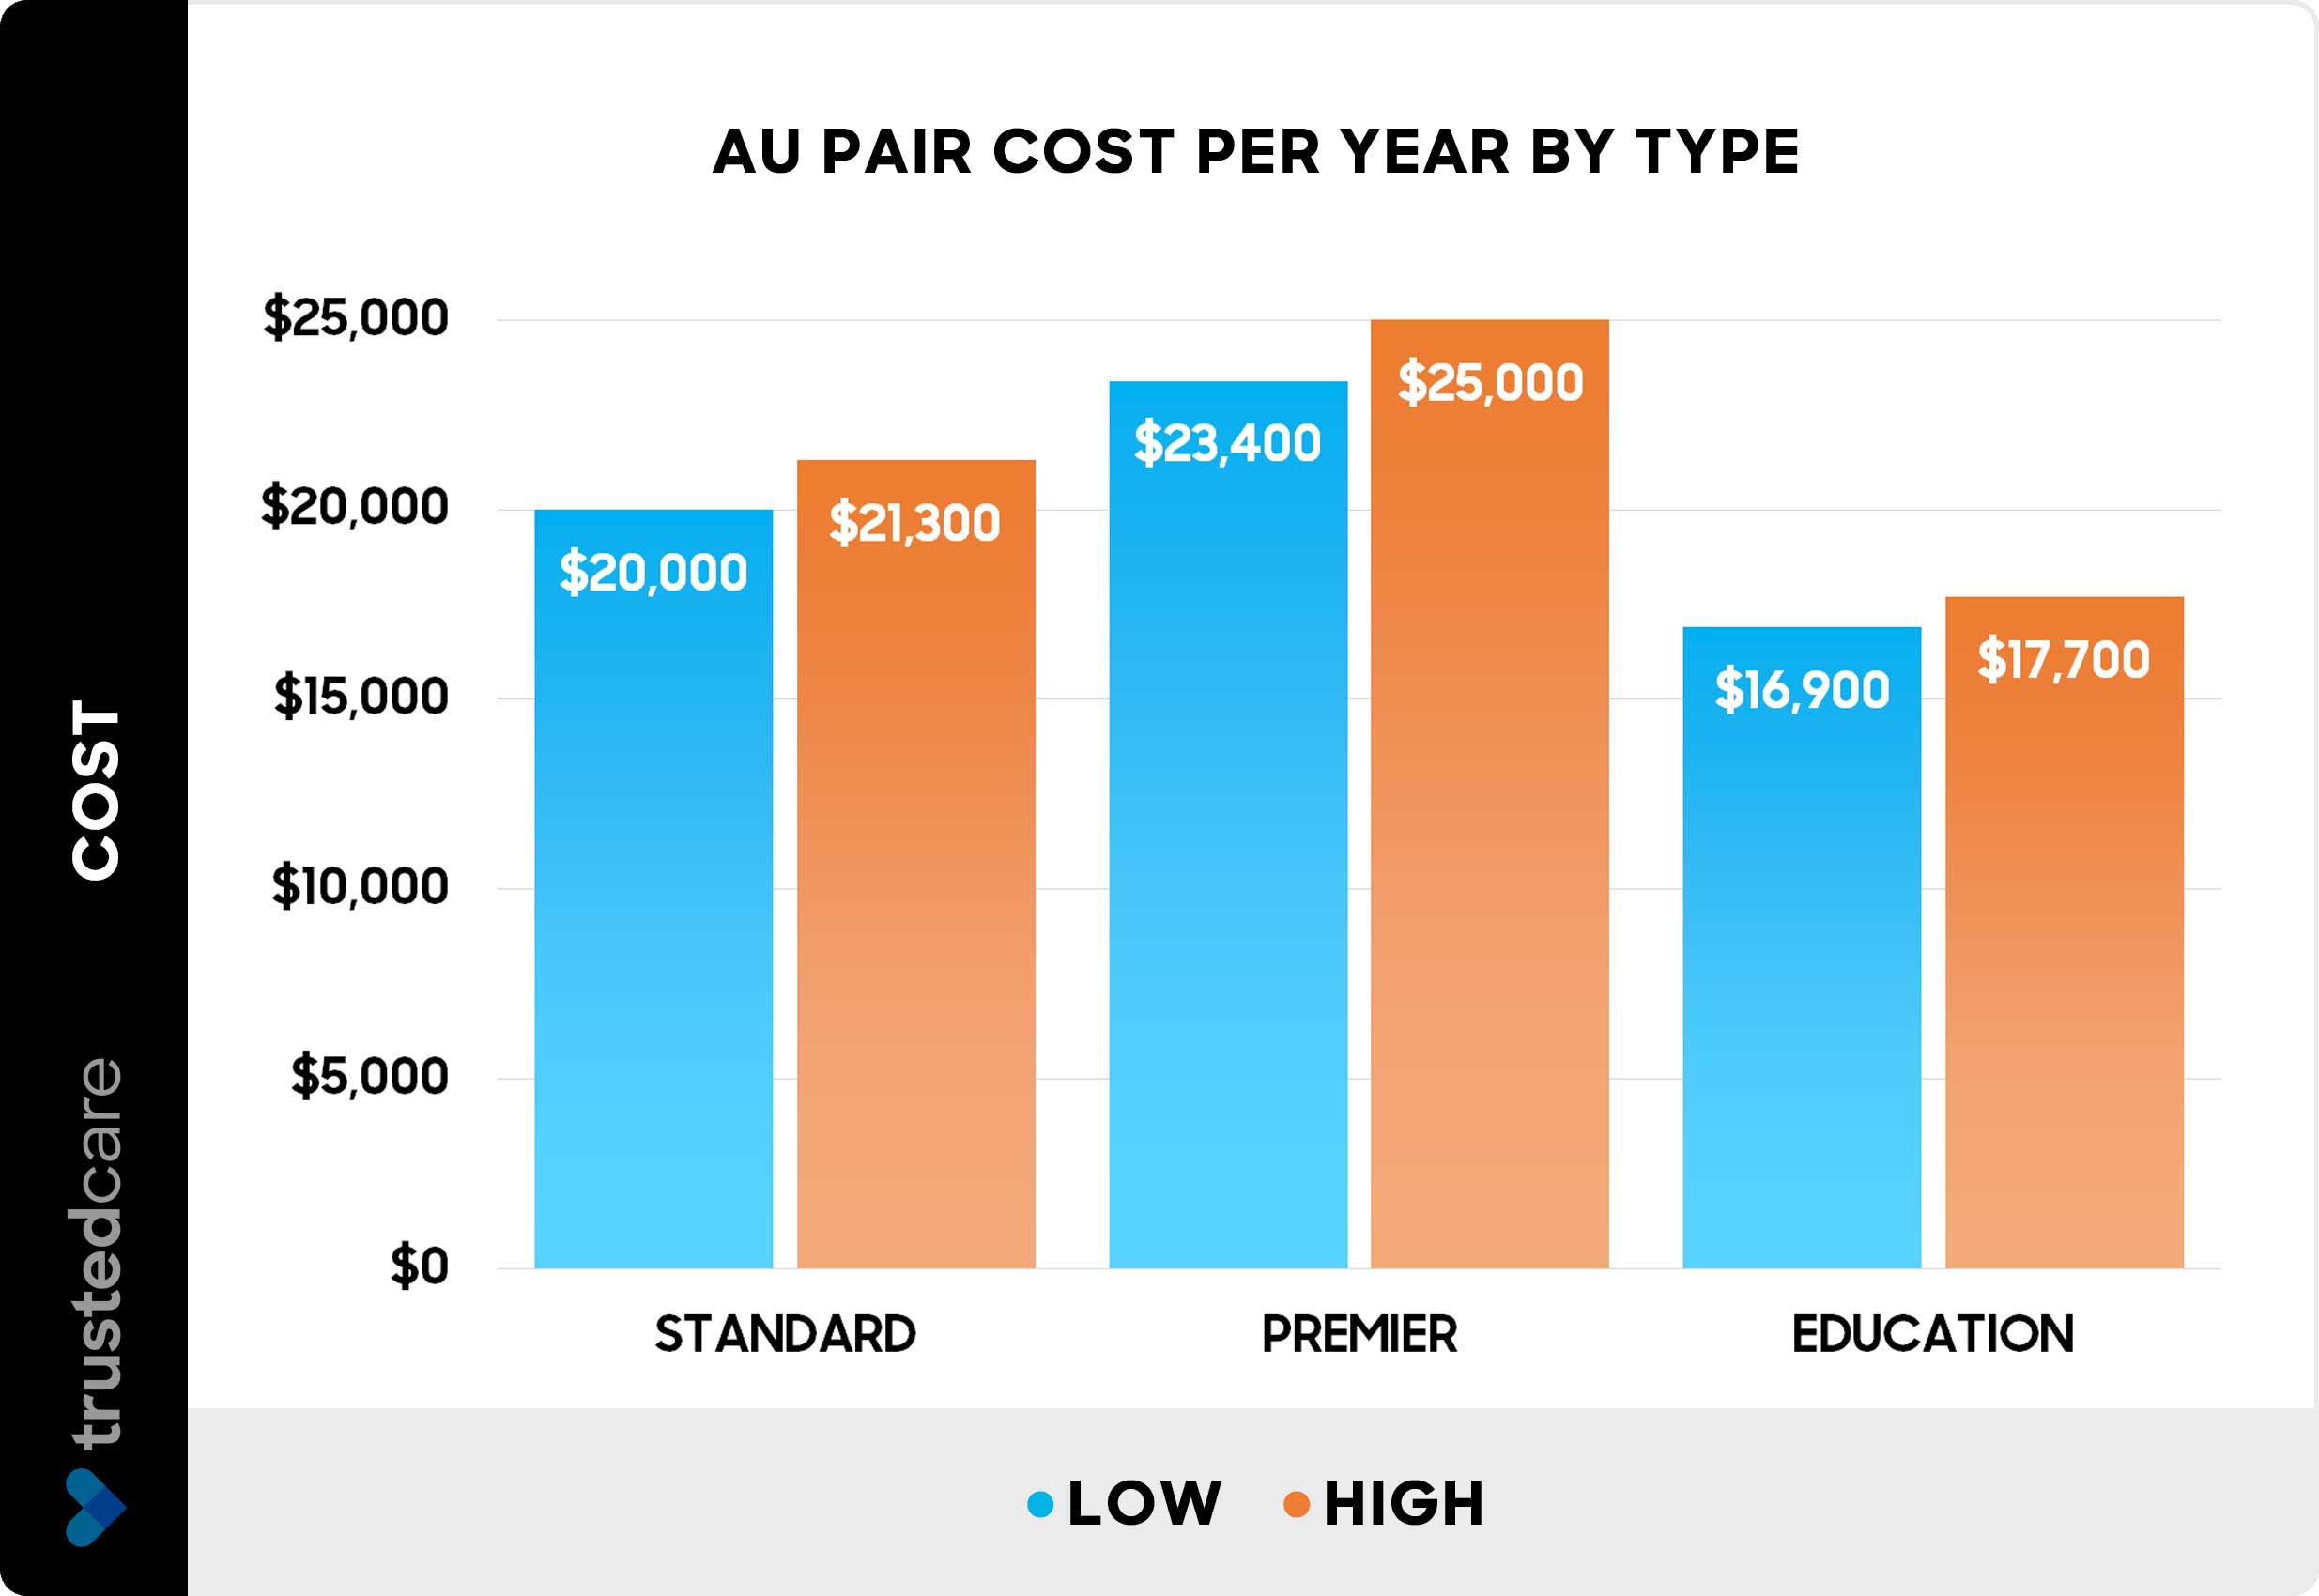 Au pair cost per year by type - Chart